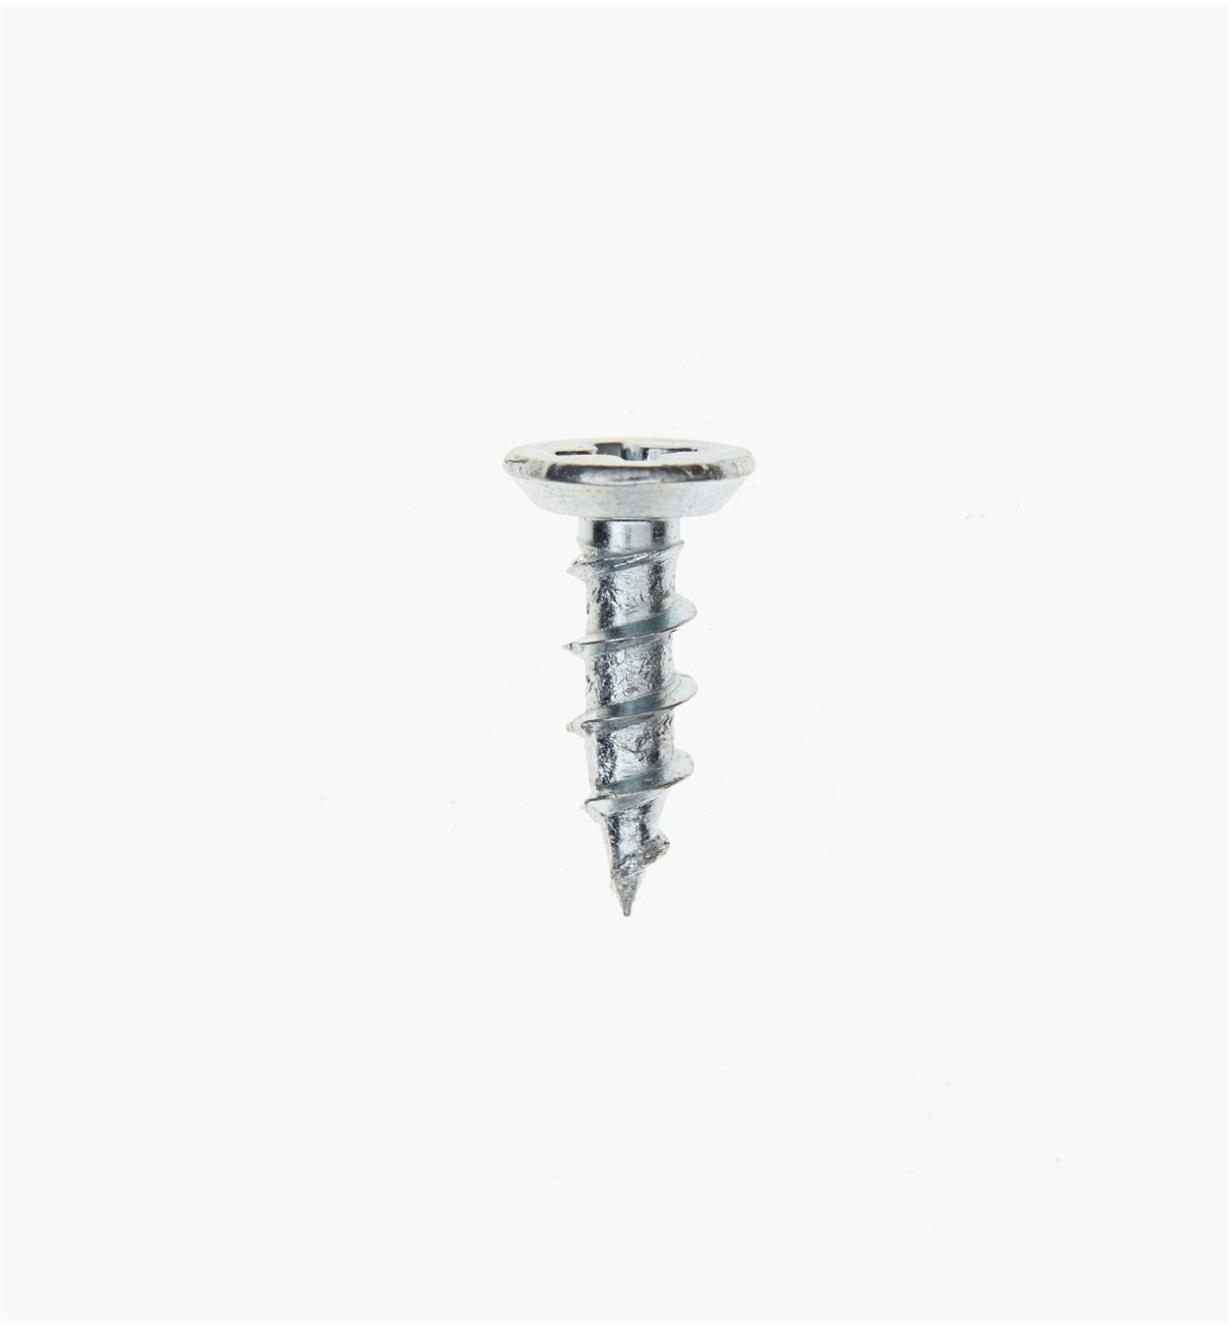 Side view of #6 × 1/2" Zinc-Plated Hinge Screw